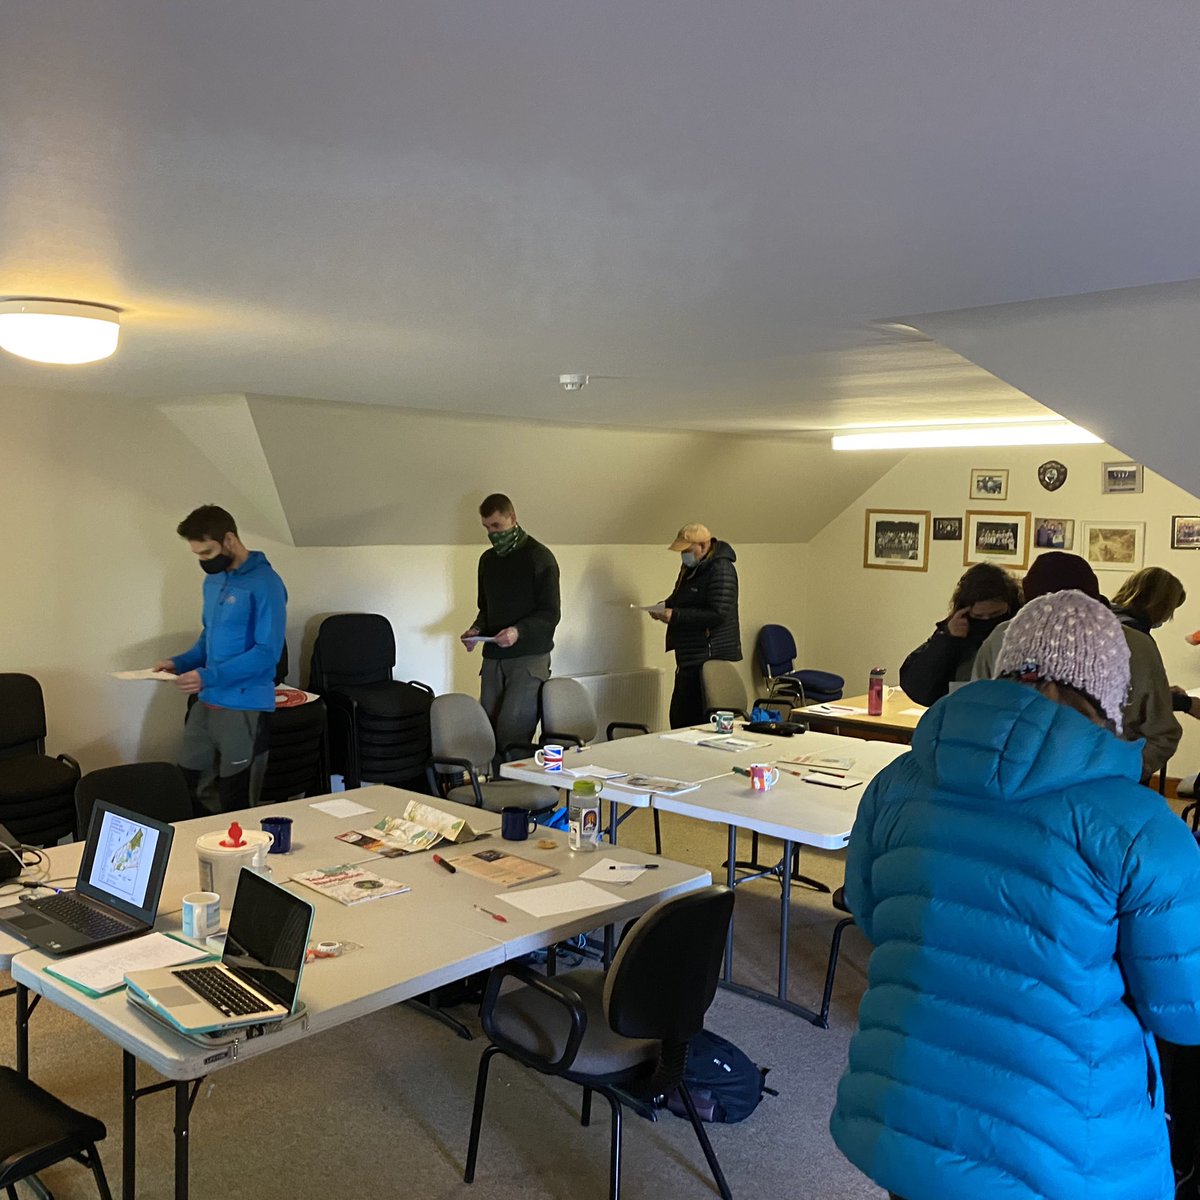 Thanks to everyone who came along to the National Navigation Award Scheme Tutor course today and good luck with your future teaching! 

#navigatewithconfidence #nnas #nnastutor #hillgoers #hillskills #mapreading #navigation